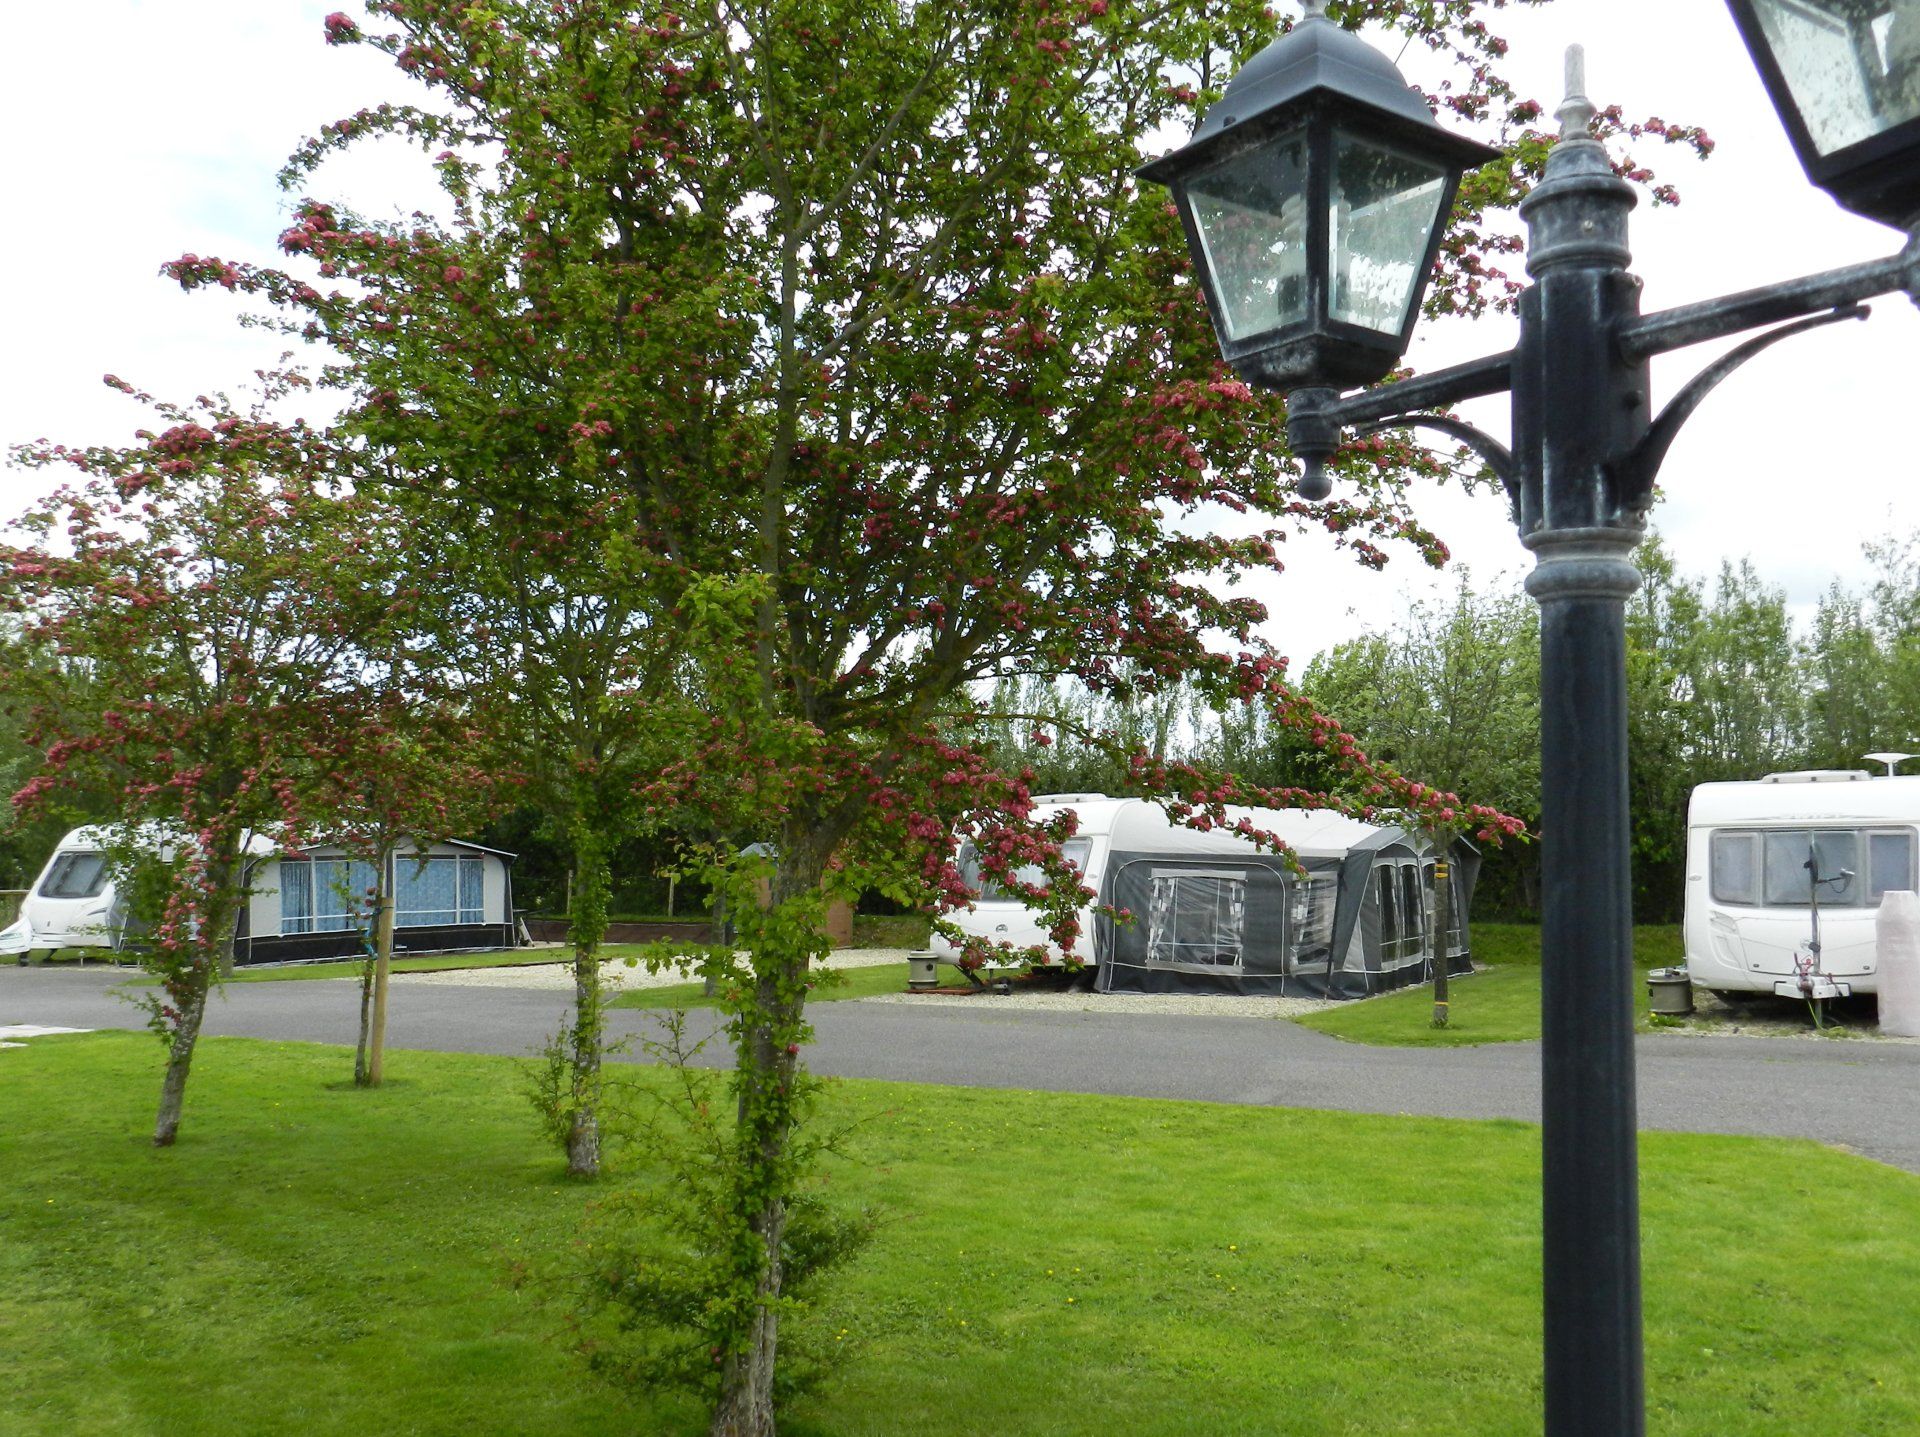 Light, New Trees & Caravans at Coombes Cider Farm